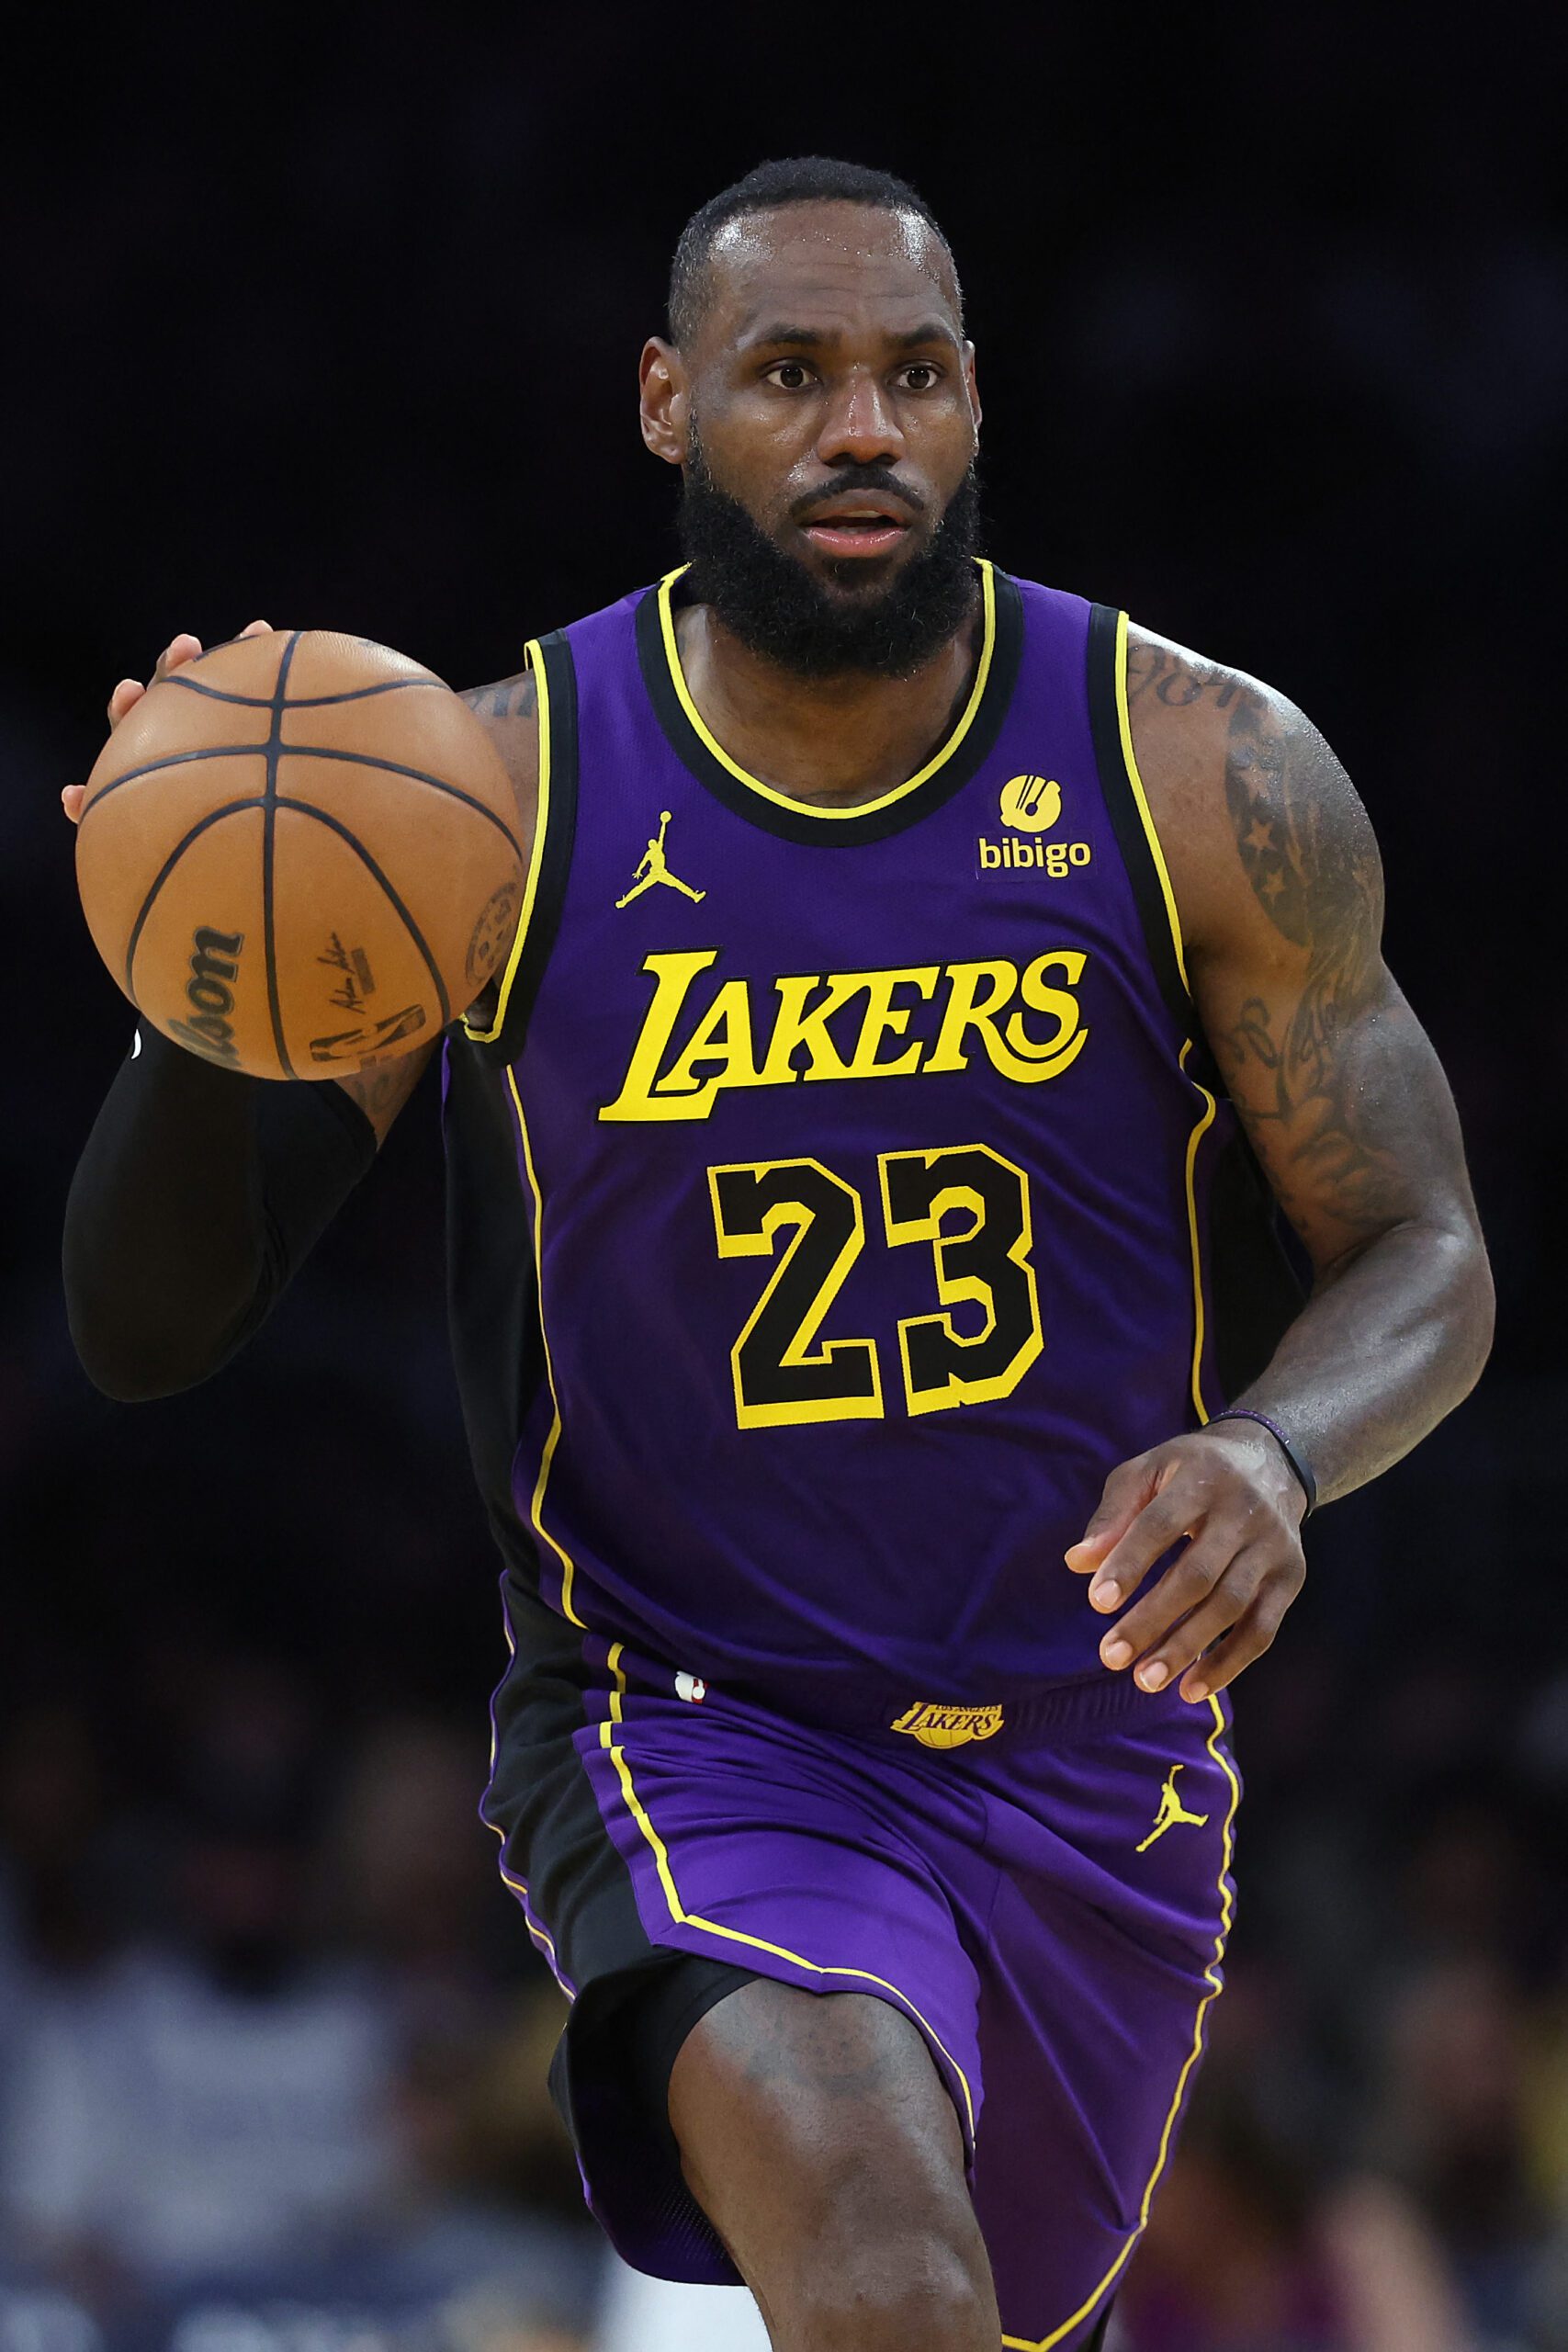 Lakers vs Grizzlies Prediction, Odds and NBA Picks, Wednesday, March 27